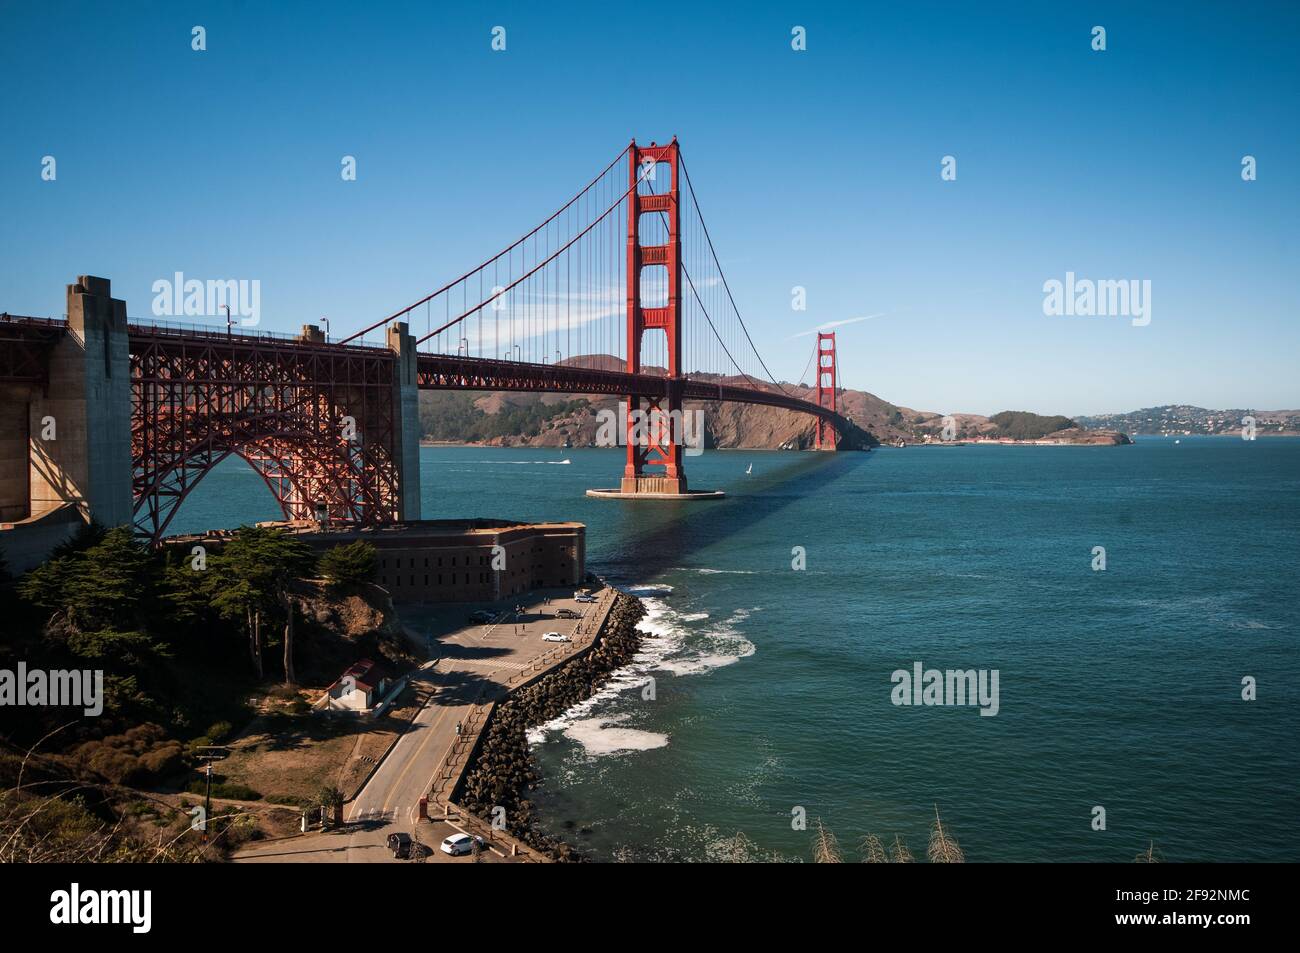 The Golden Gate Bridge is a suspension bridge that spans the Golden Gate, a  strait that connects the Pacific Ocean with the San Francisco Bay. It  connects San Francisco, on the northern